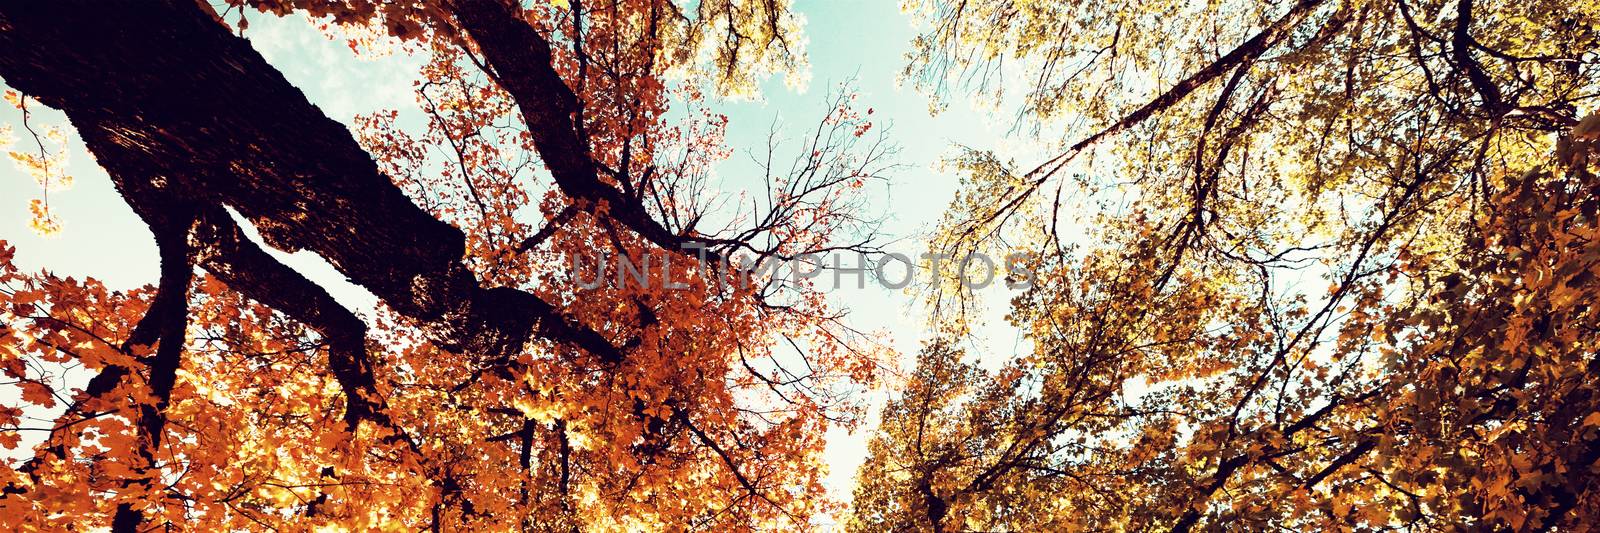  Low angle view of trees against blue sky by Wavebreakmedia